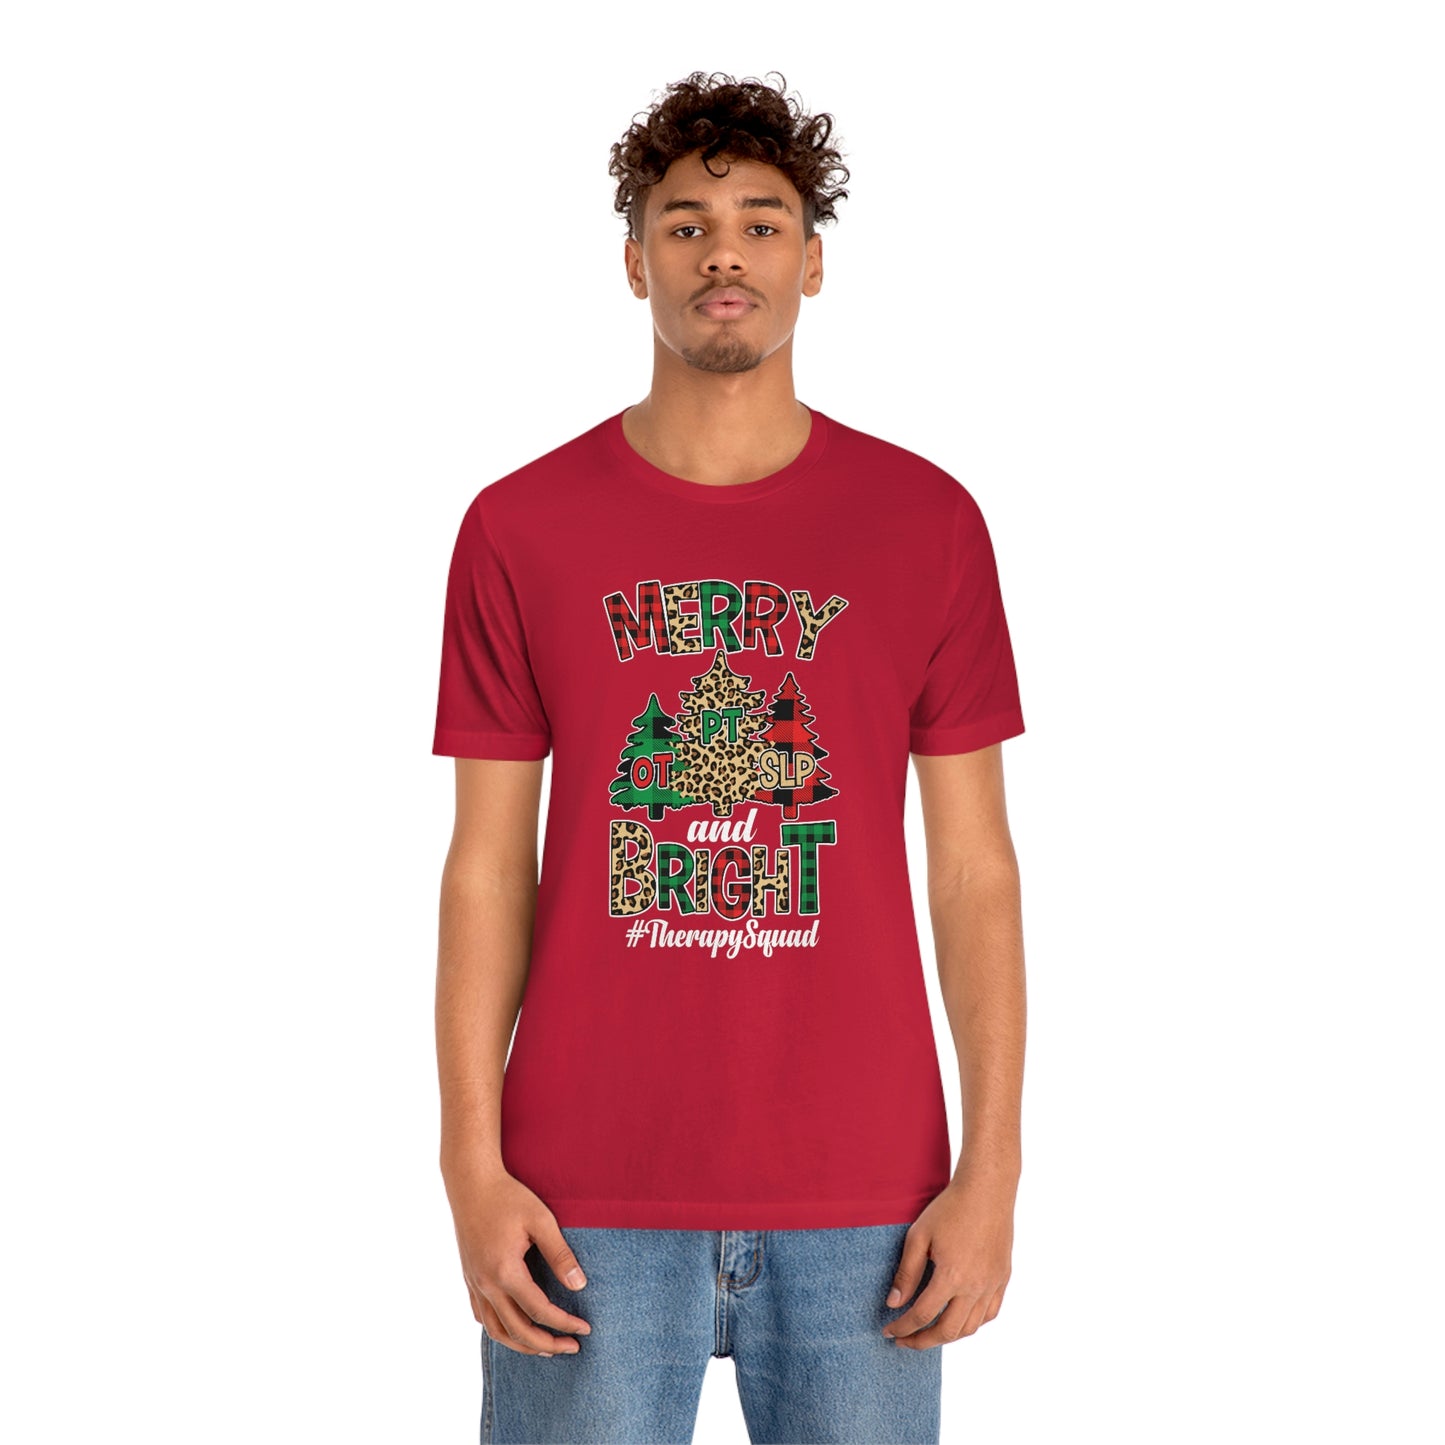 Merry And Bright Therapy Squad Shirt OT PT SLP